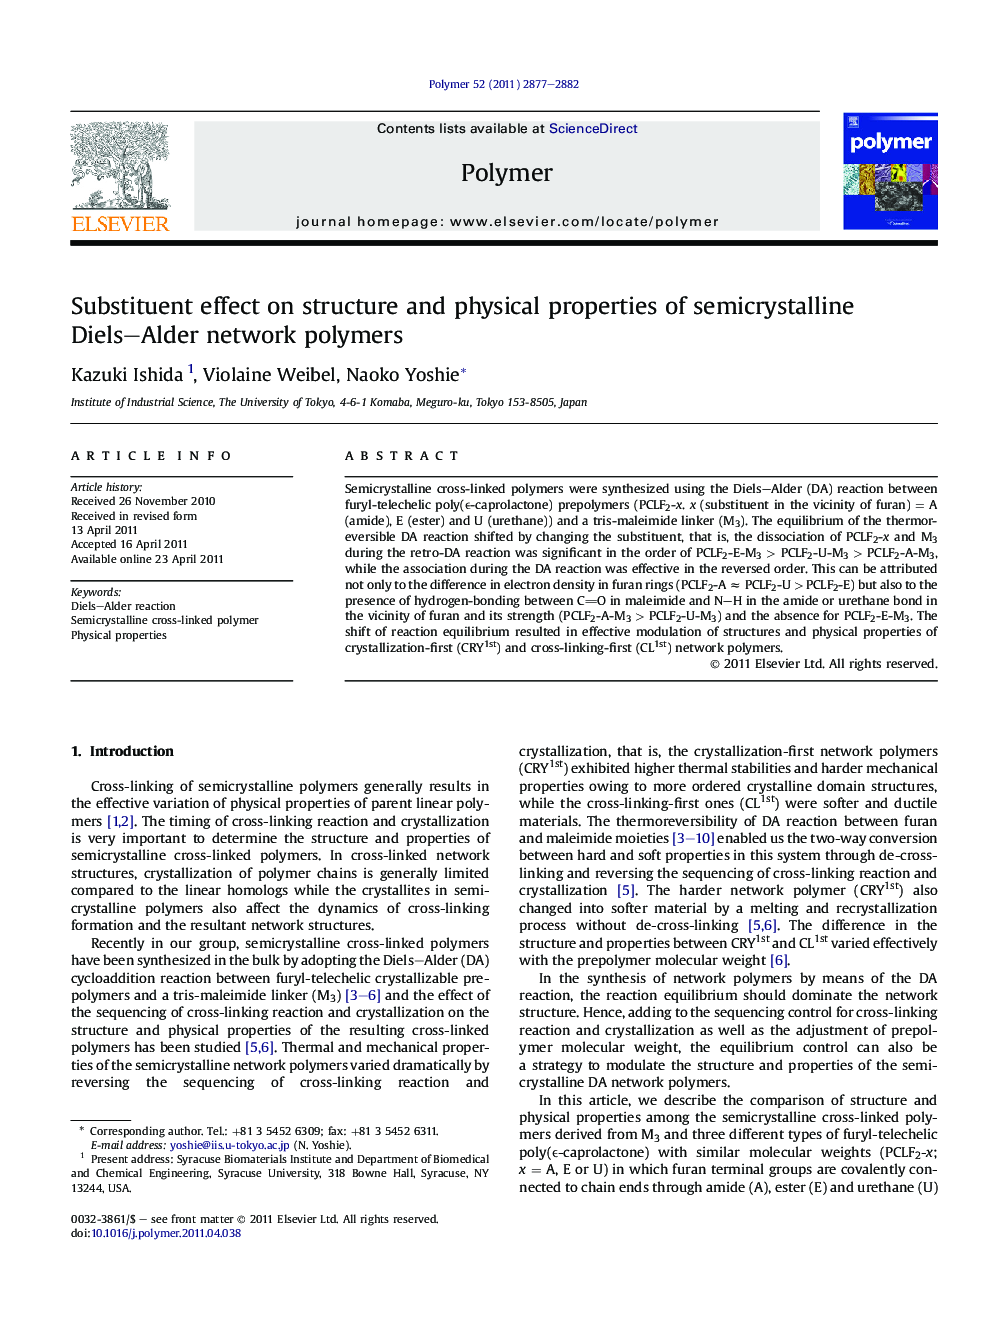 Substituent effect on structure and physical properties of semicrystalline Diels-Alder network polymers